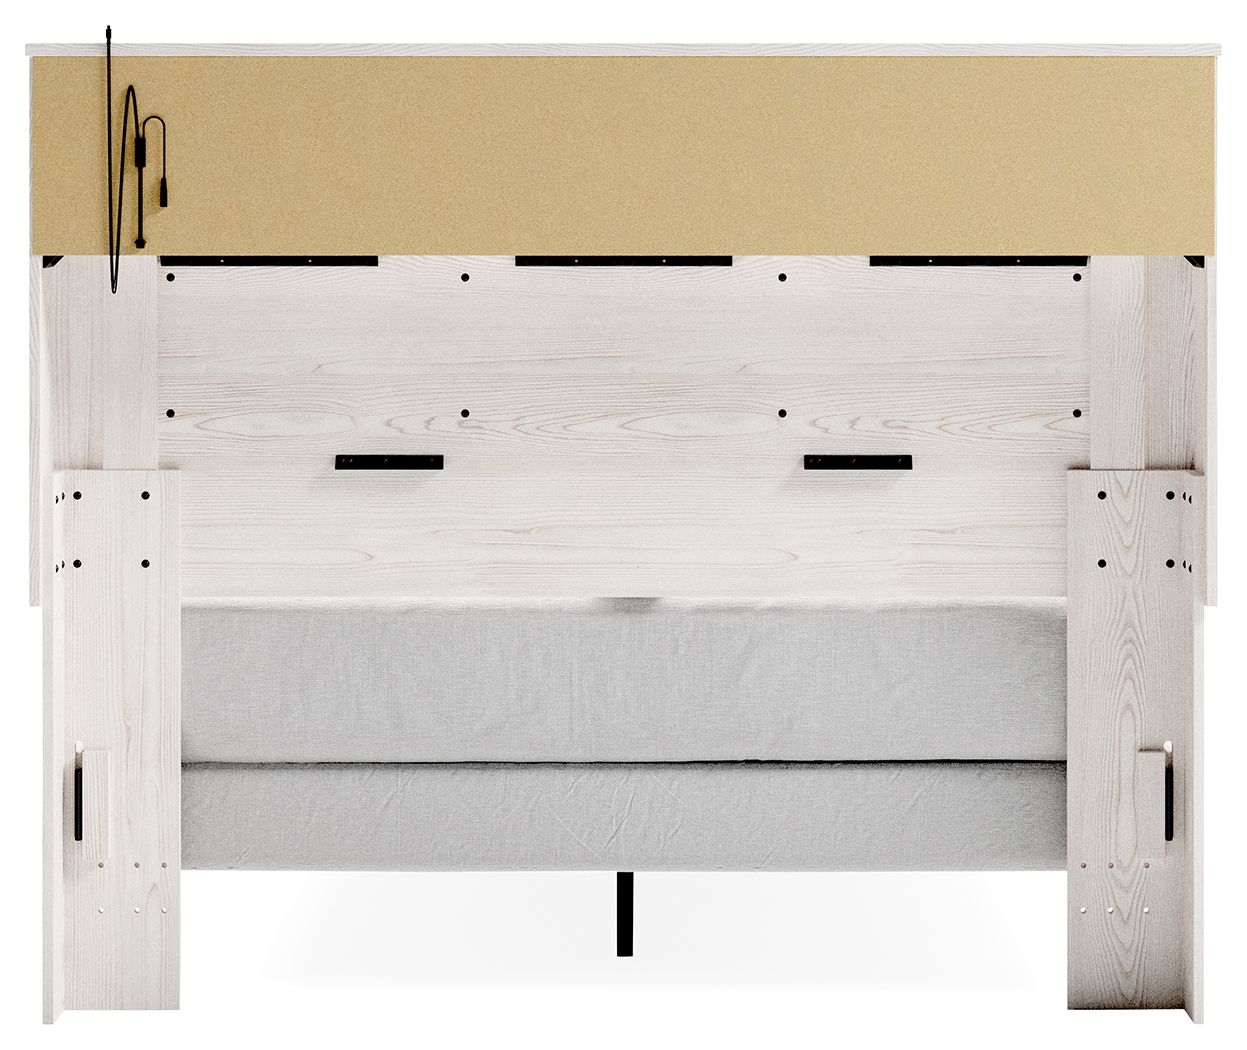 Altyra - Bookcase Bed - Tony's Home Furnishings